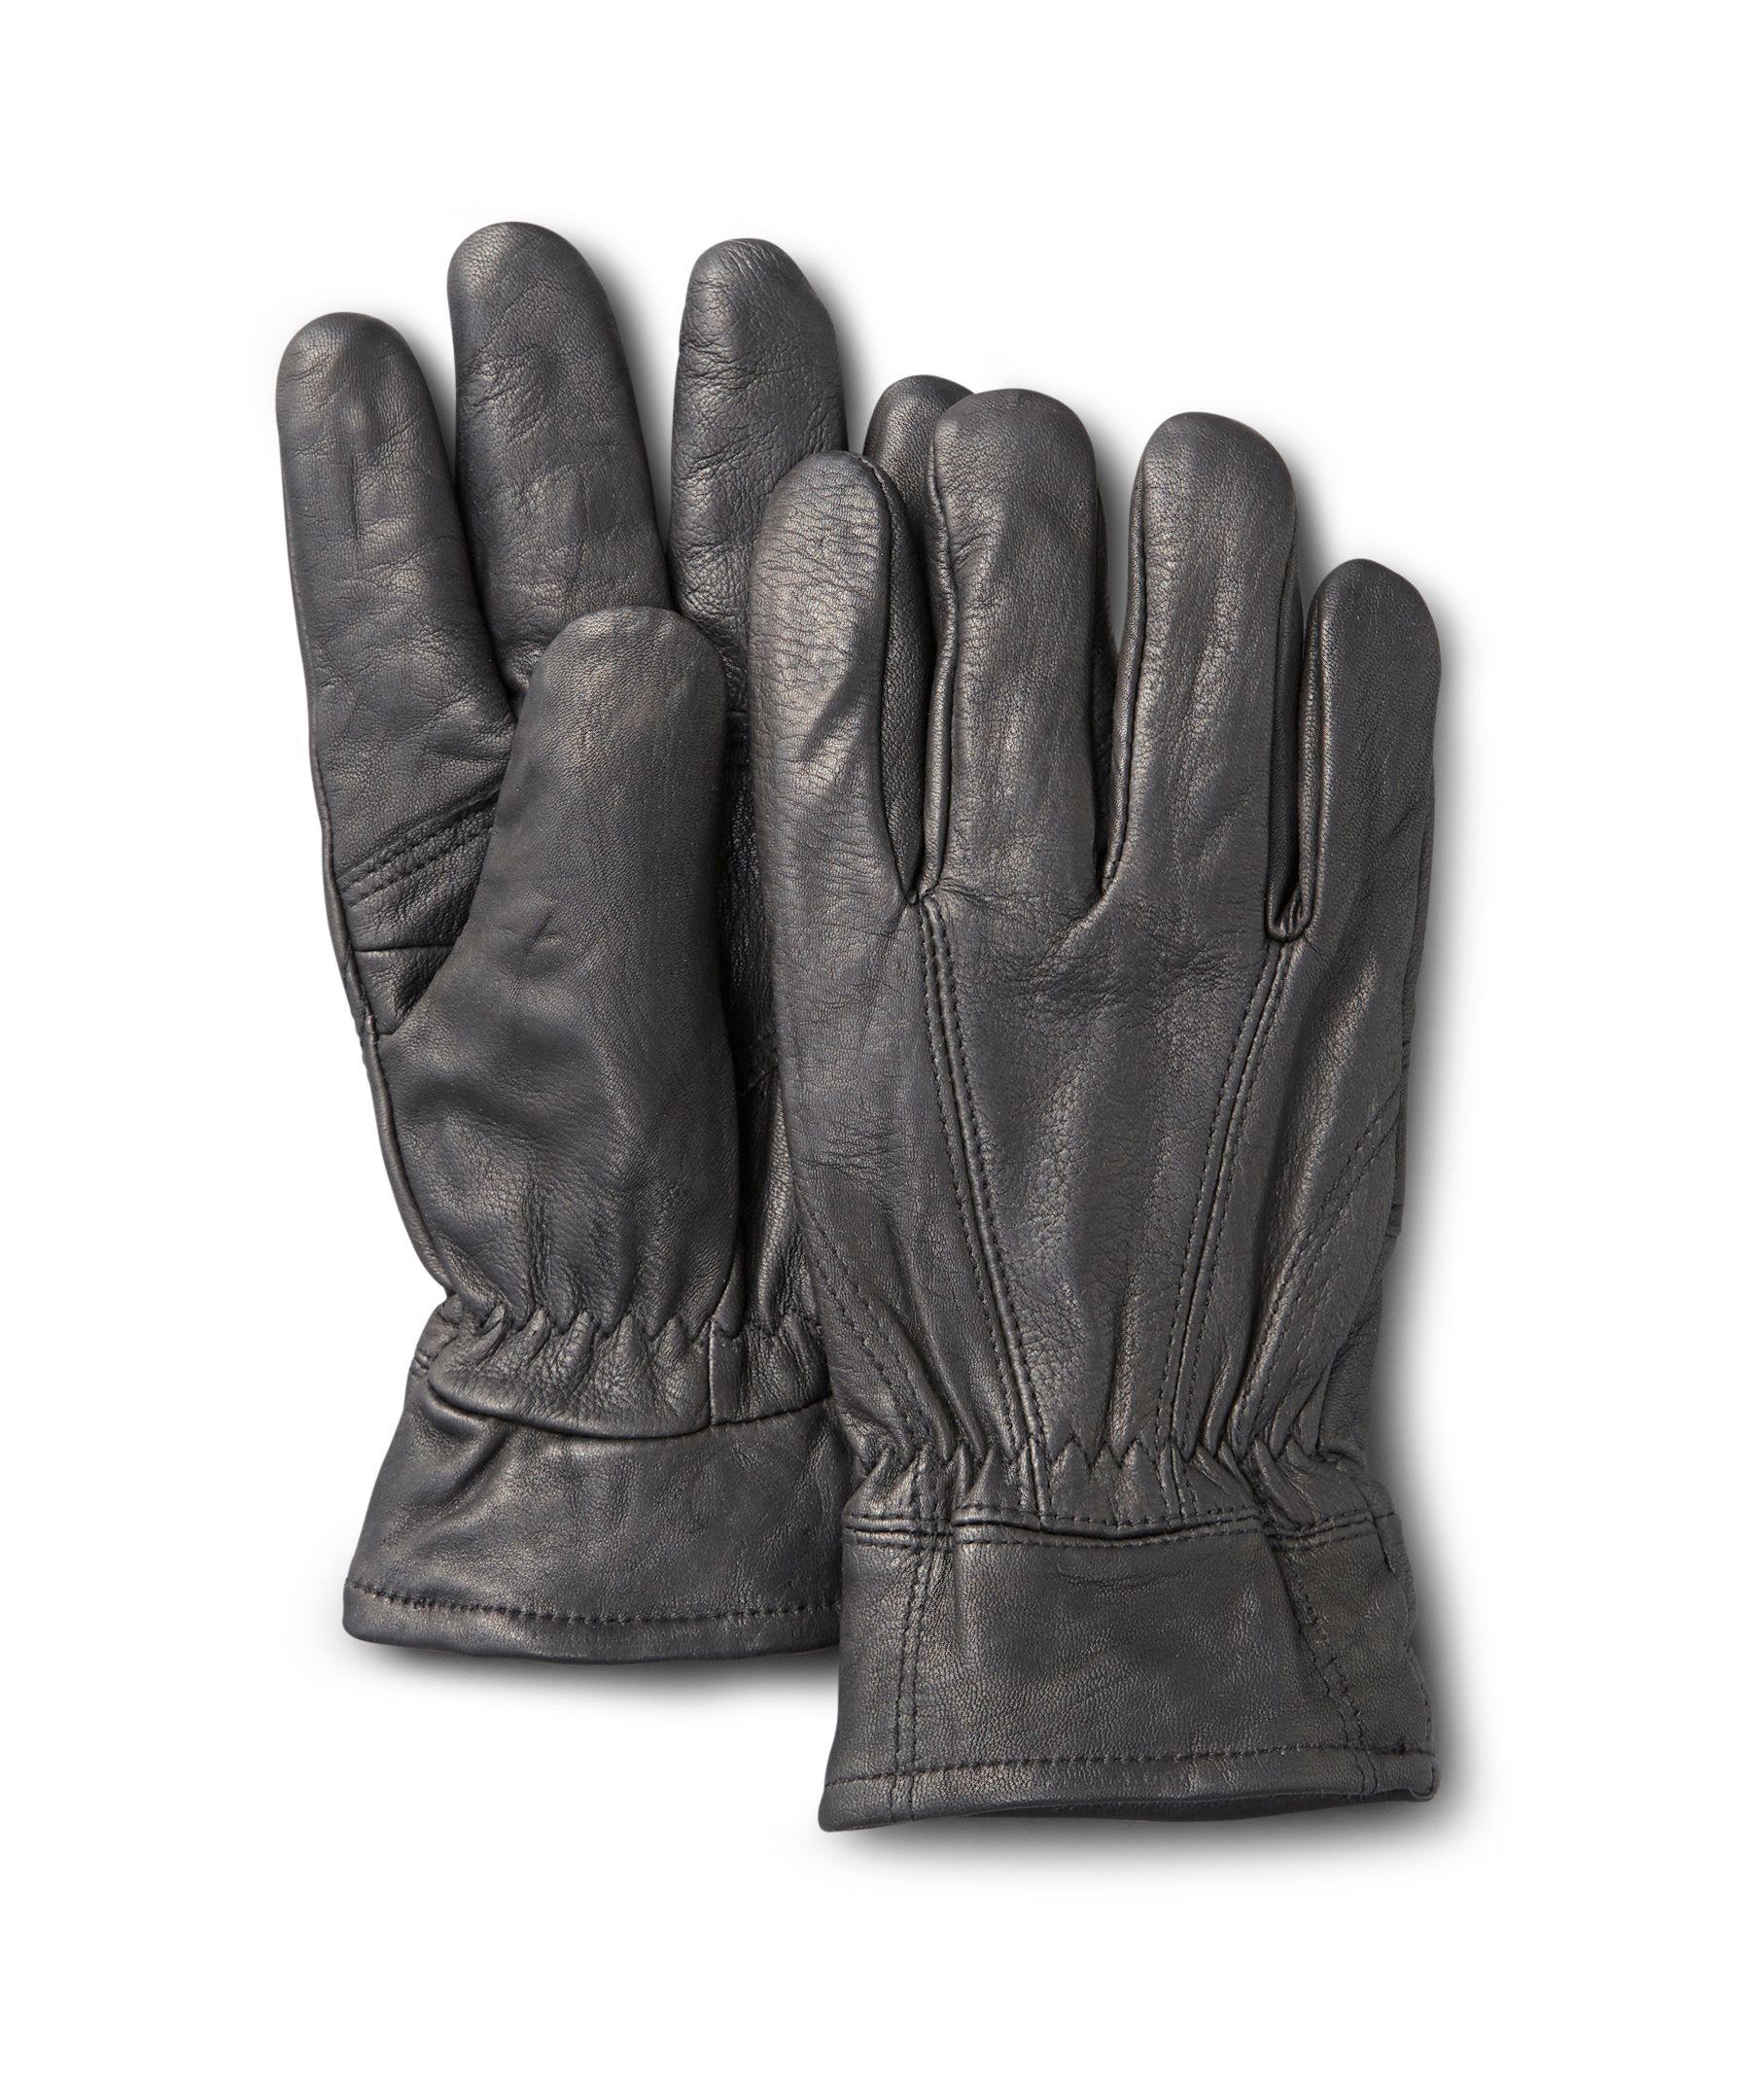 https://media-www.marks.com/product/marks-work-wearhouse/industrial-world/mens-accessories/410029919113/windriver-men-s-deerskin-thinsulate-insulation-fleece-lining-leather-gloves-c724202d-2917-4200-8a7e-c5cbdc3a64c9-jpgrendition.jpg